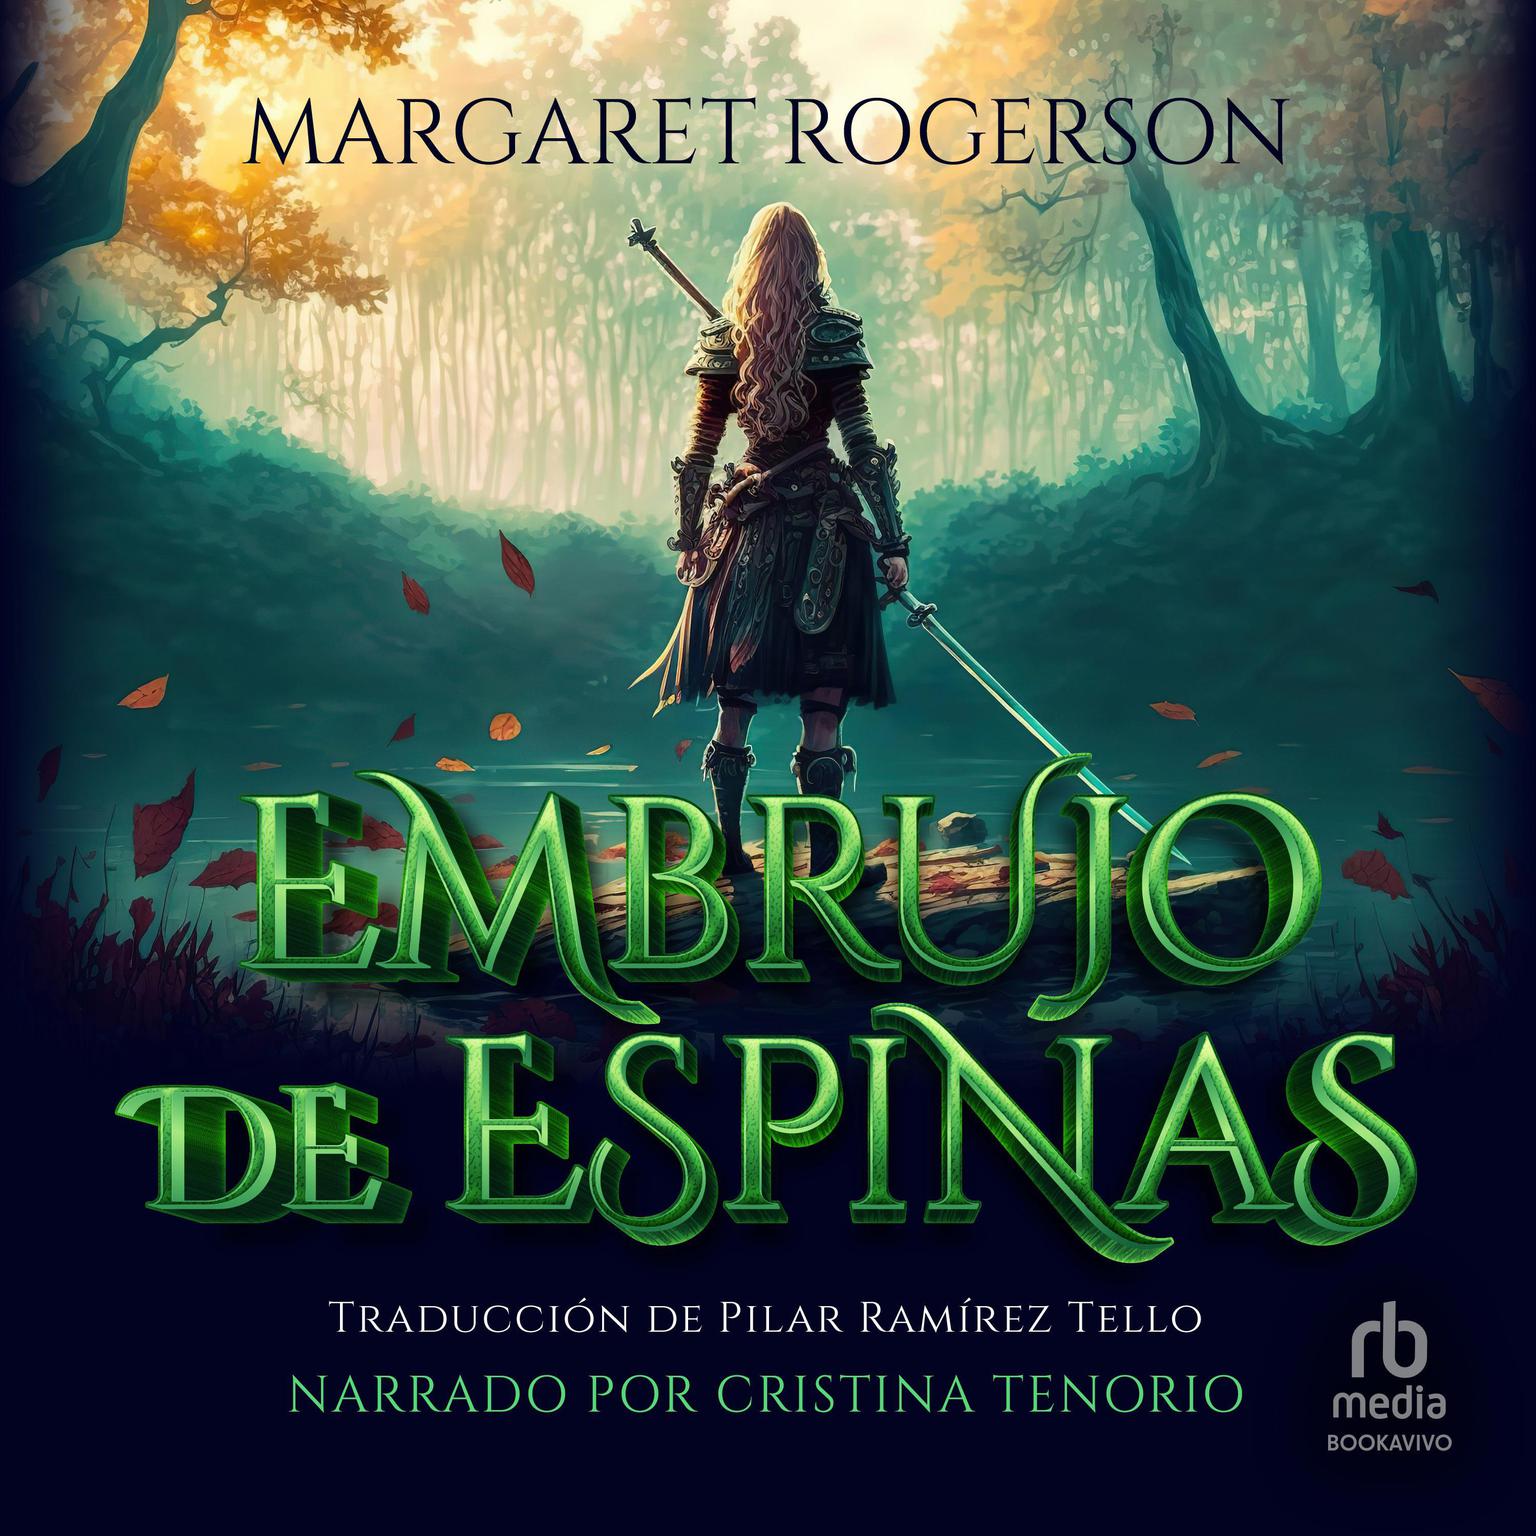 Embrujo de espinas (Sorcery of Thorns) Audiobook, by Margaret Rogerson